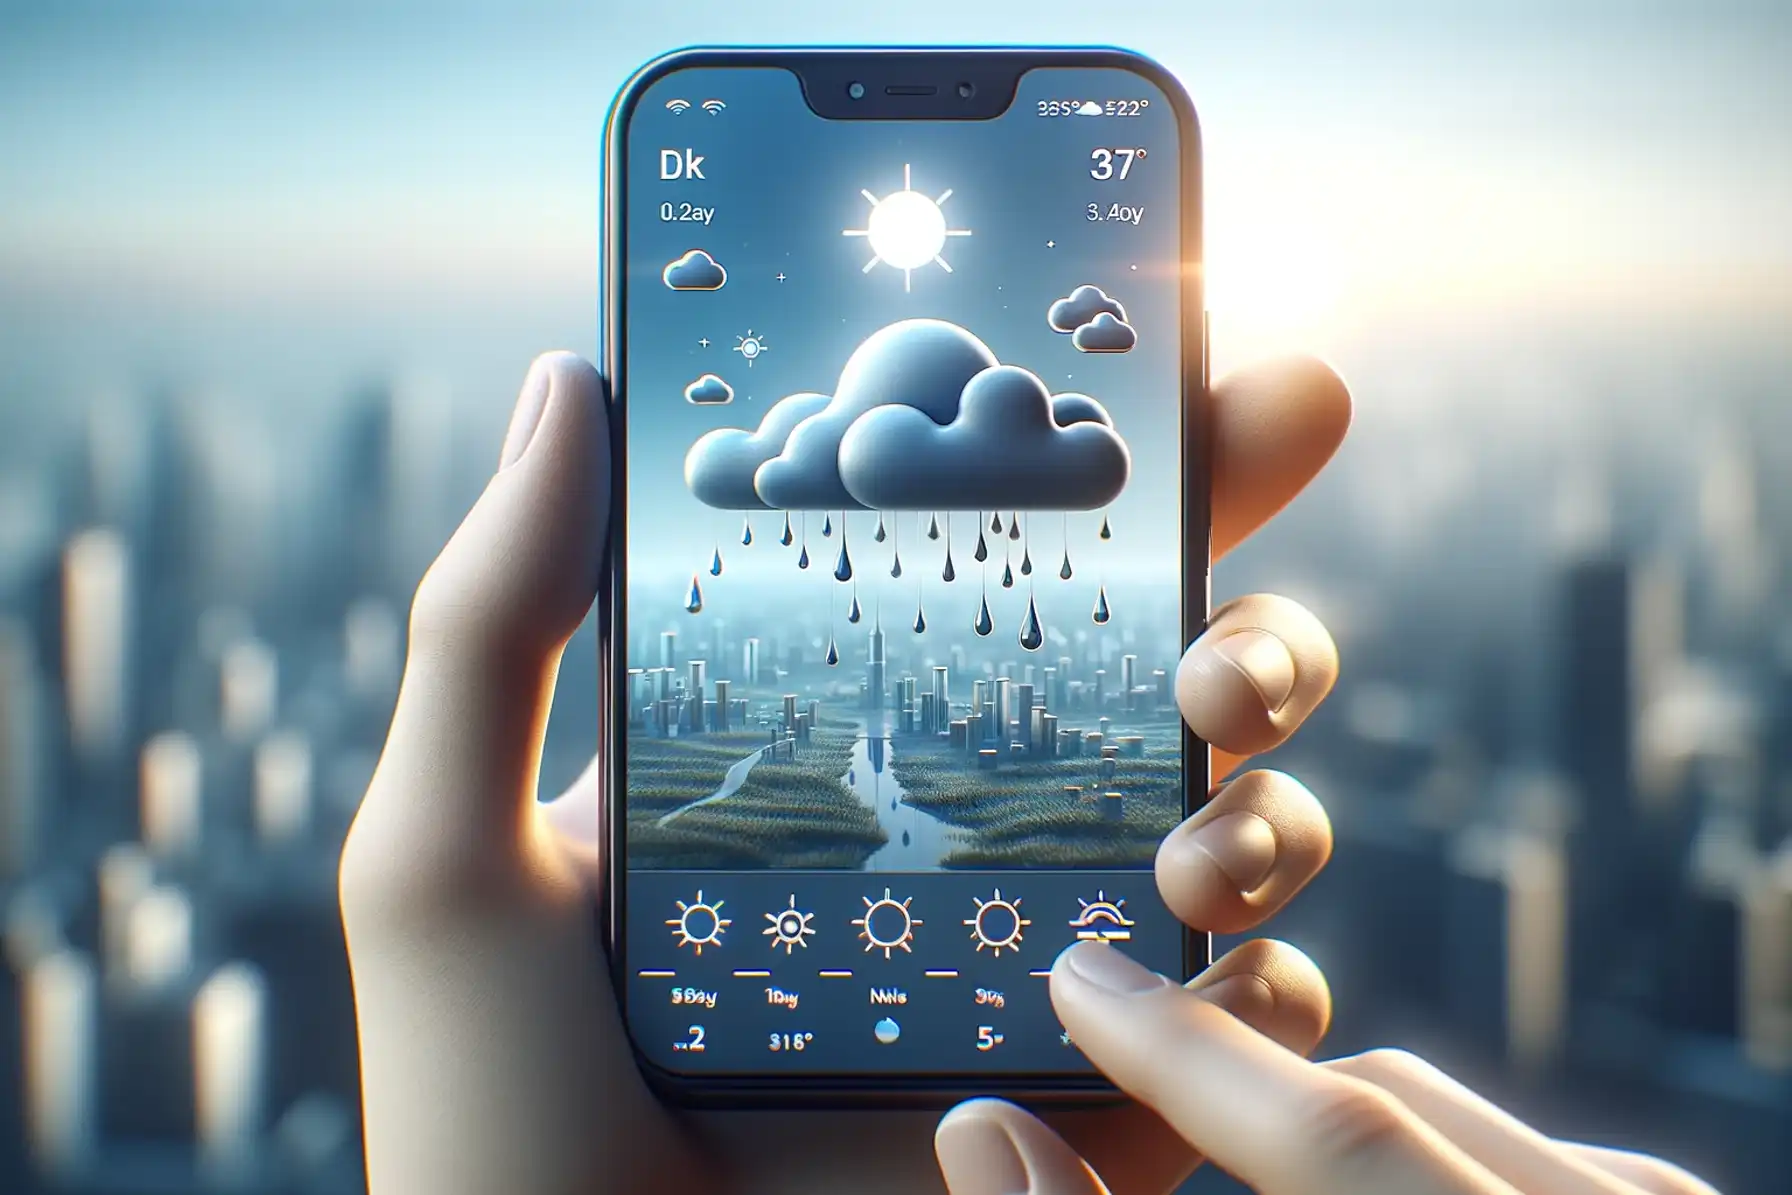 How to Add a city or location to a weather app (with video)